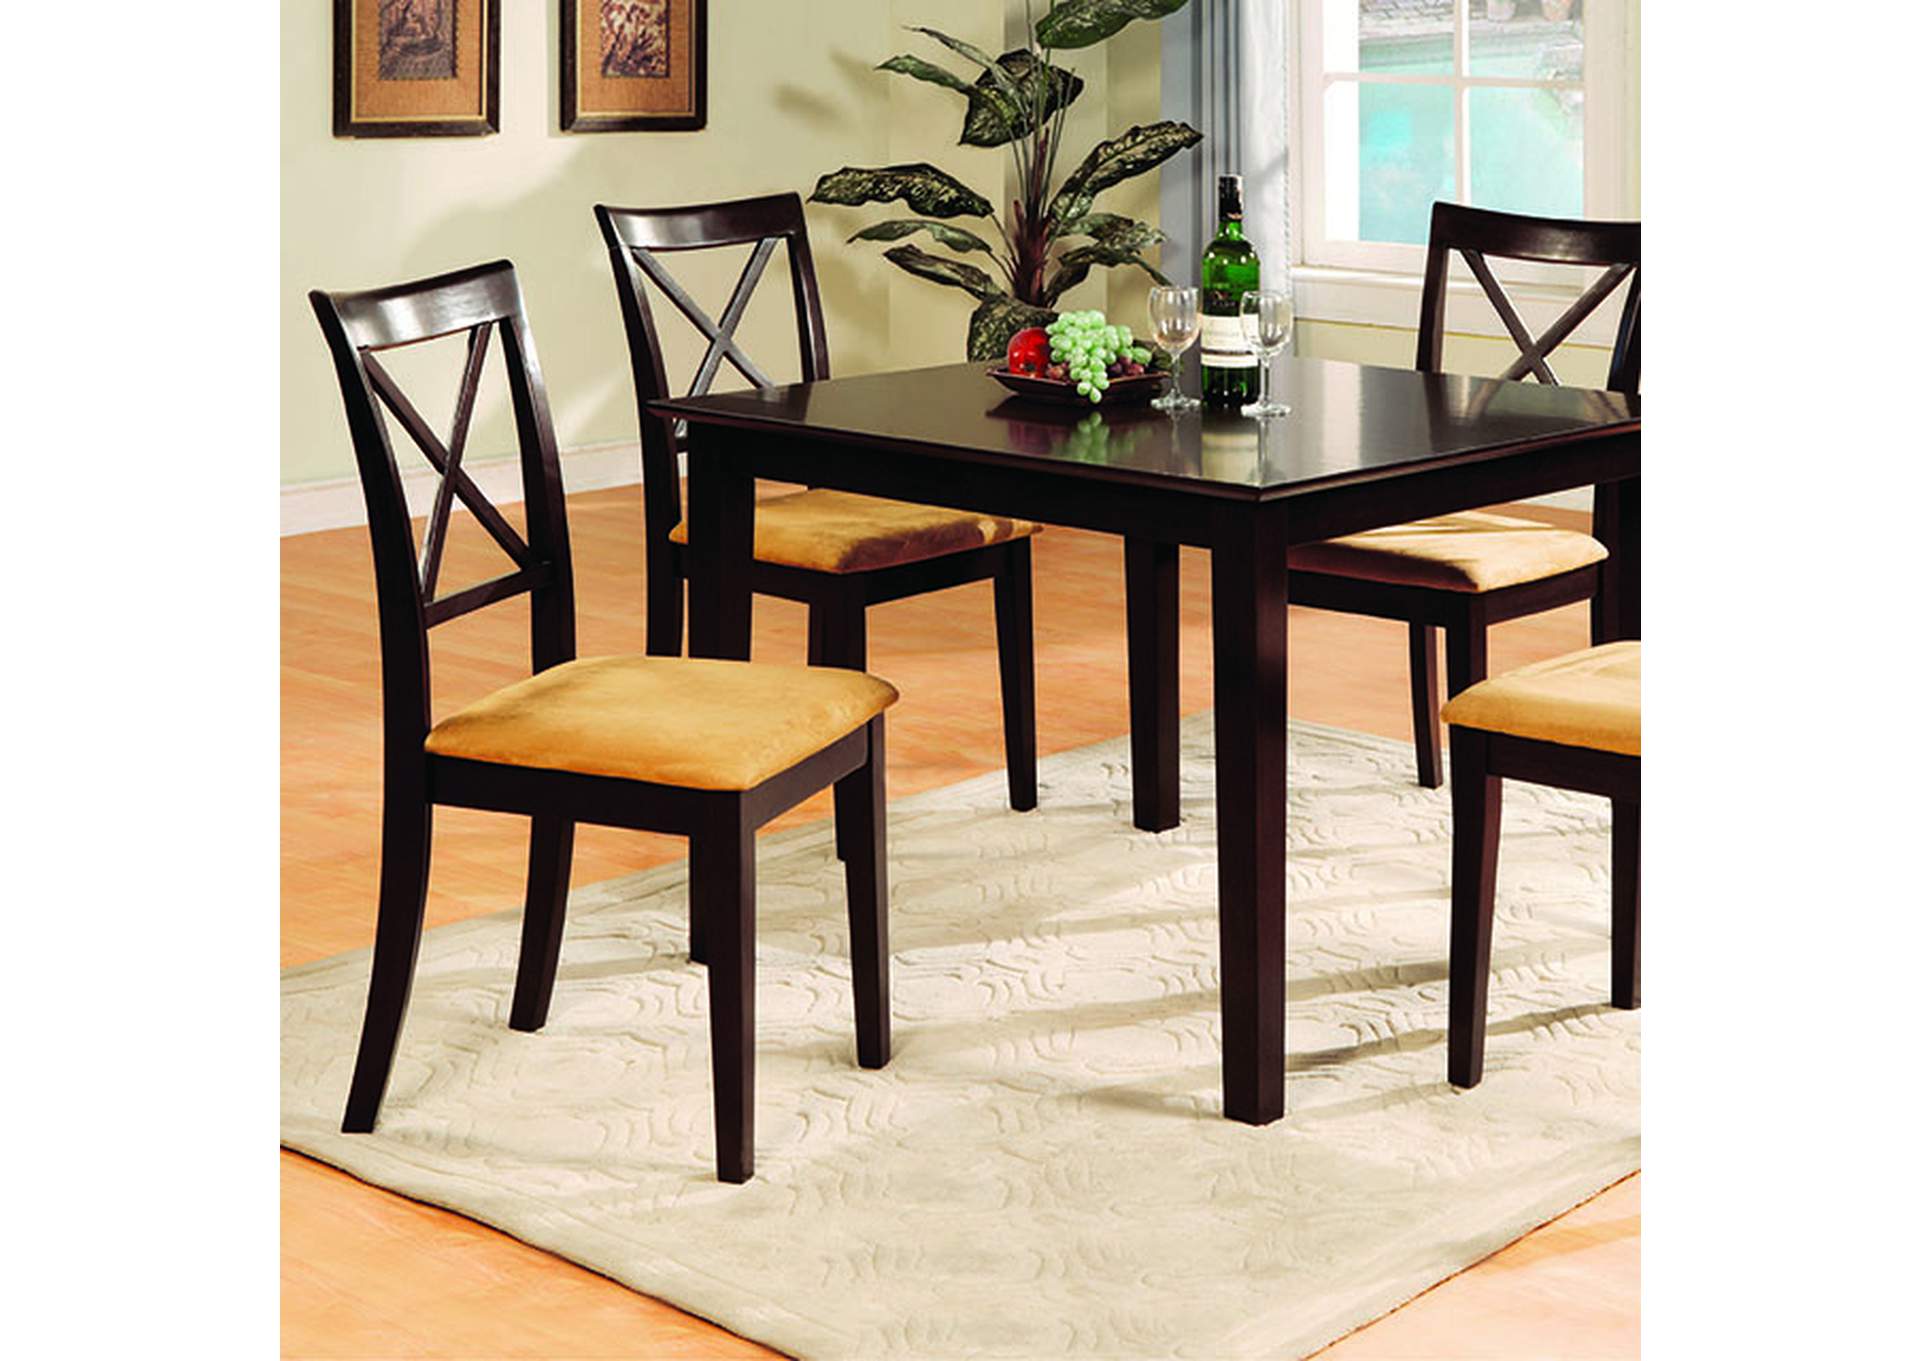 Melbourne 38" Square Dining Table,Furniture of America